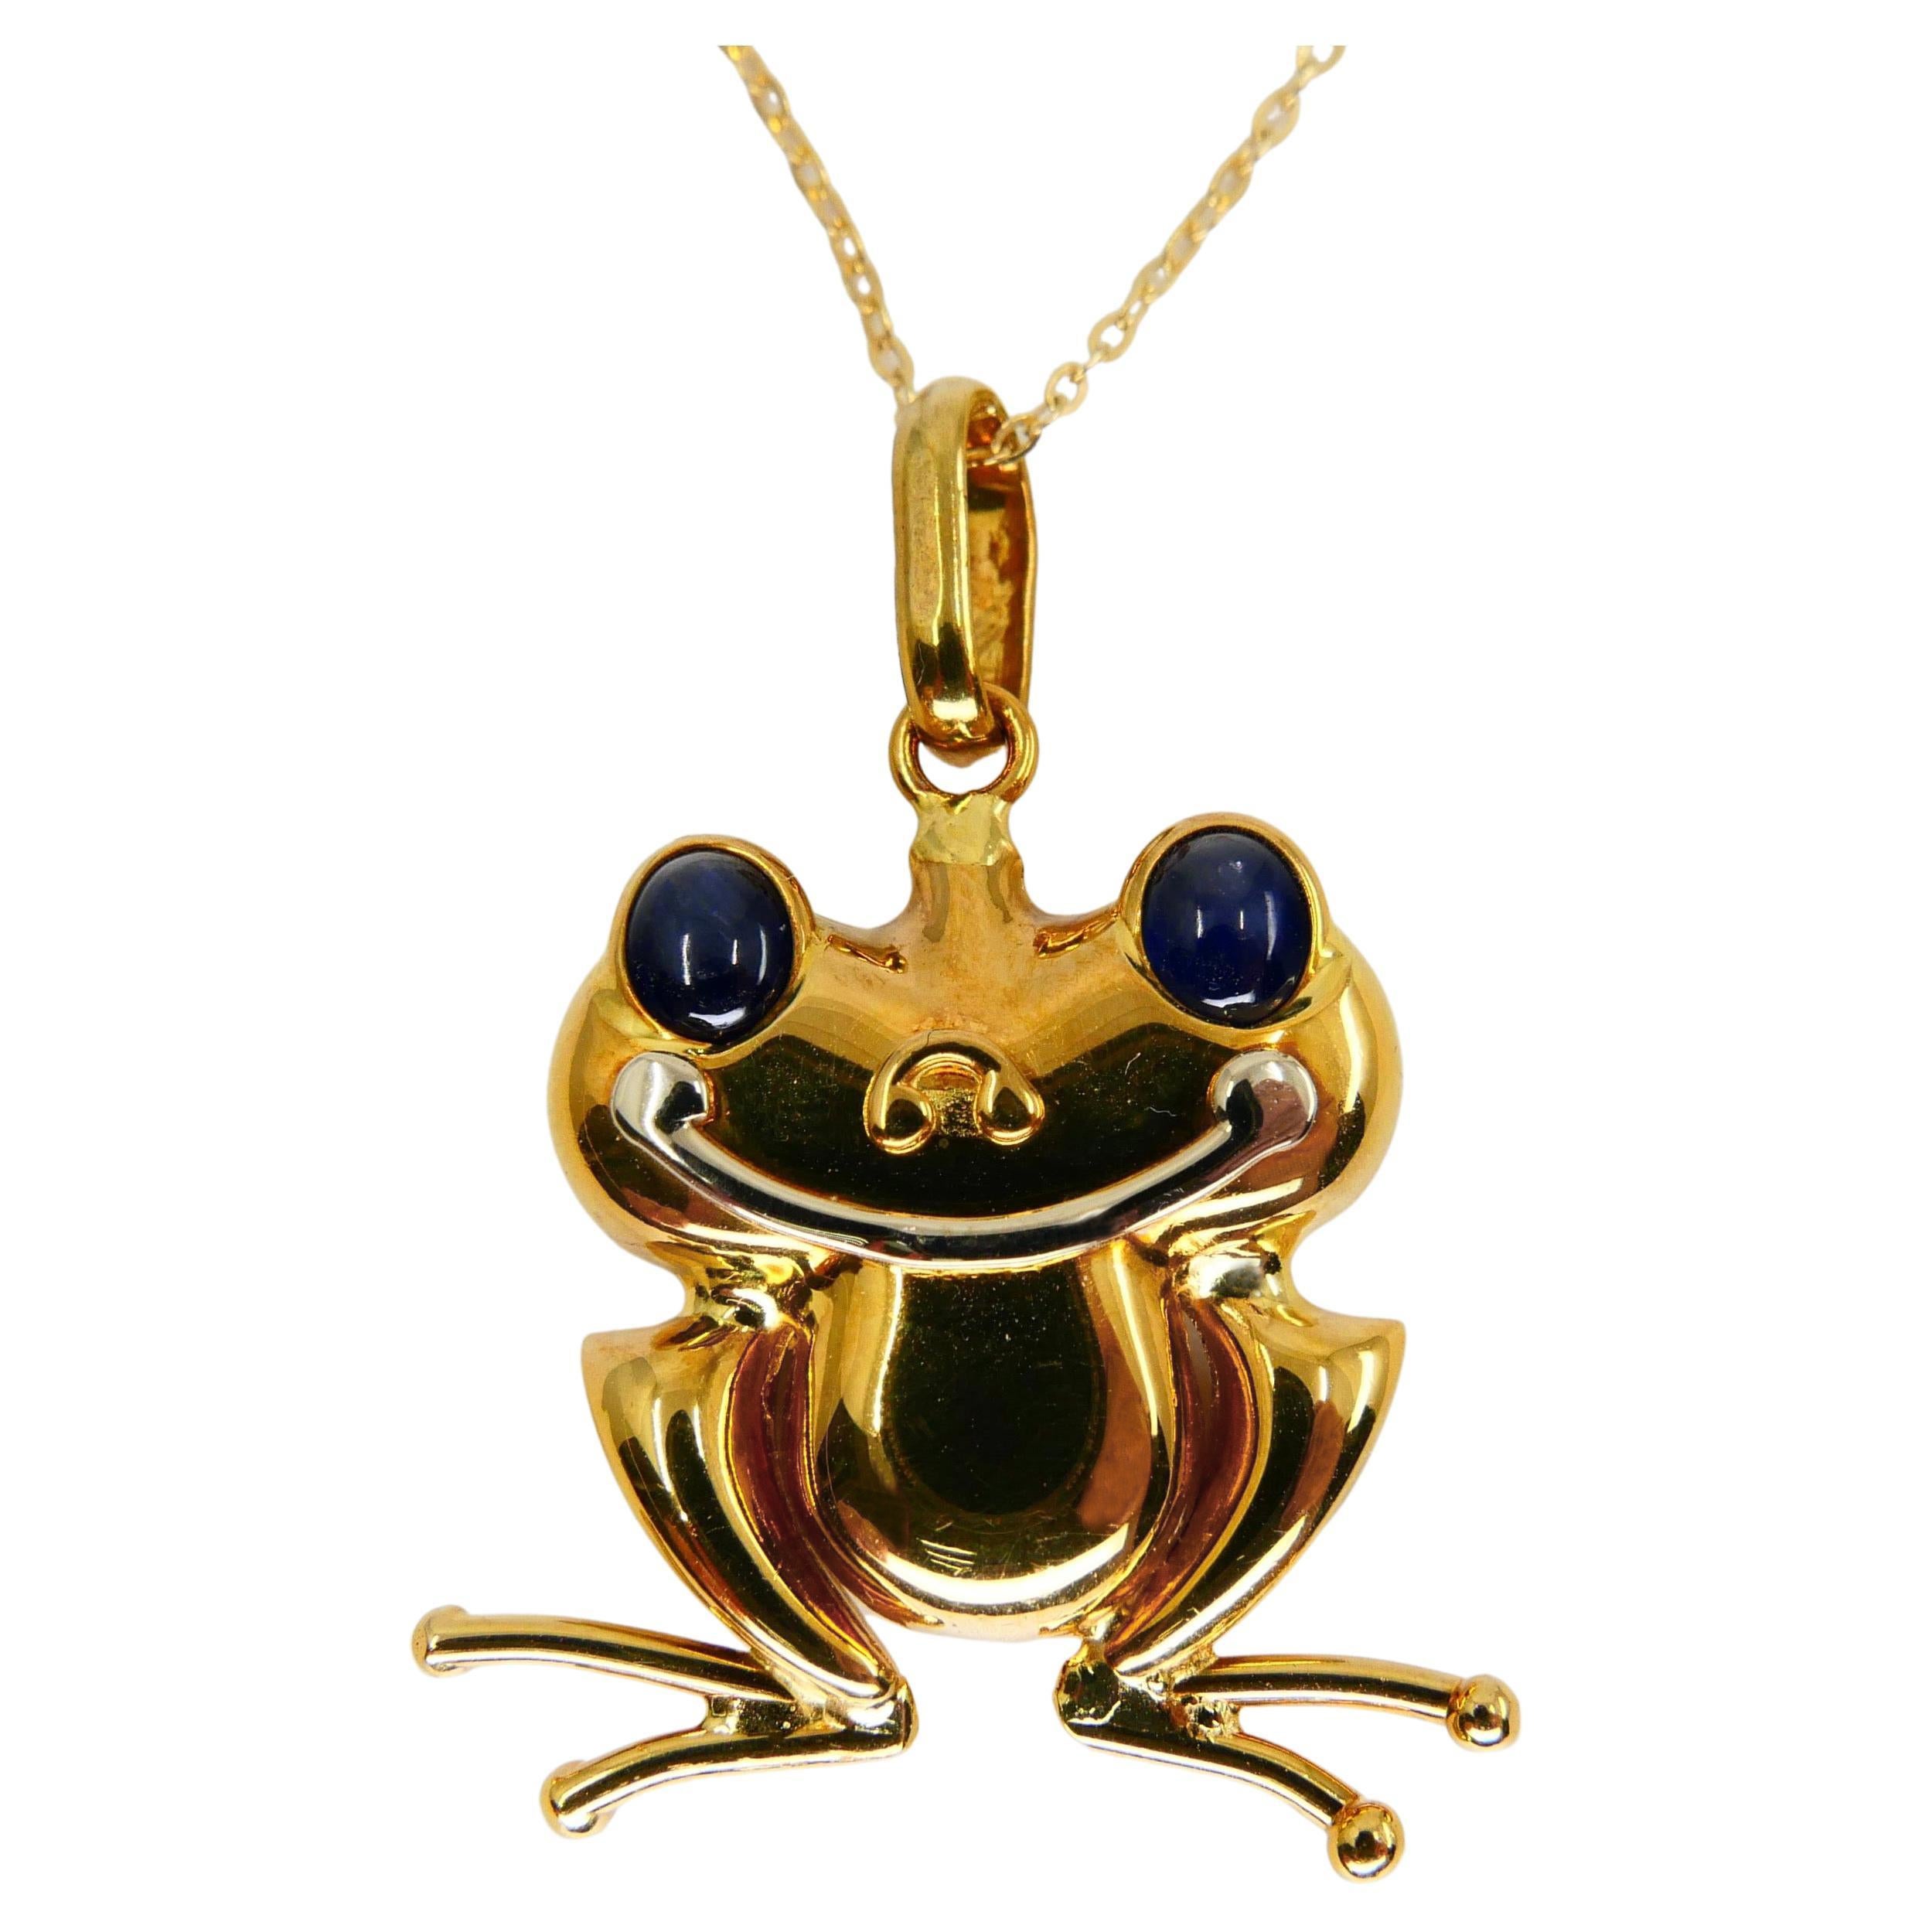 23mm 14k Gold Frog Top View With Extended Legs / Textured and 2 d Charm Pendant  Necklace Jewelry Gifts for Women - Walmart.com